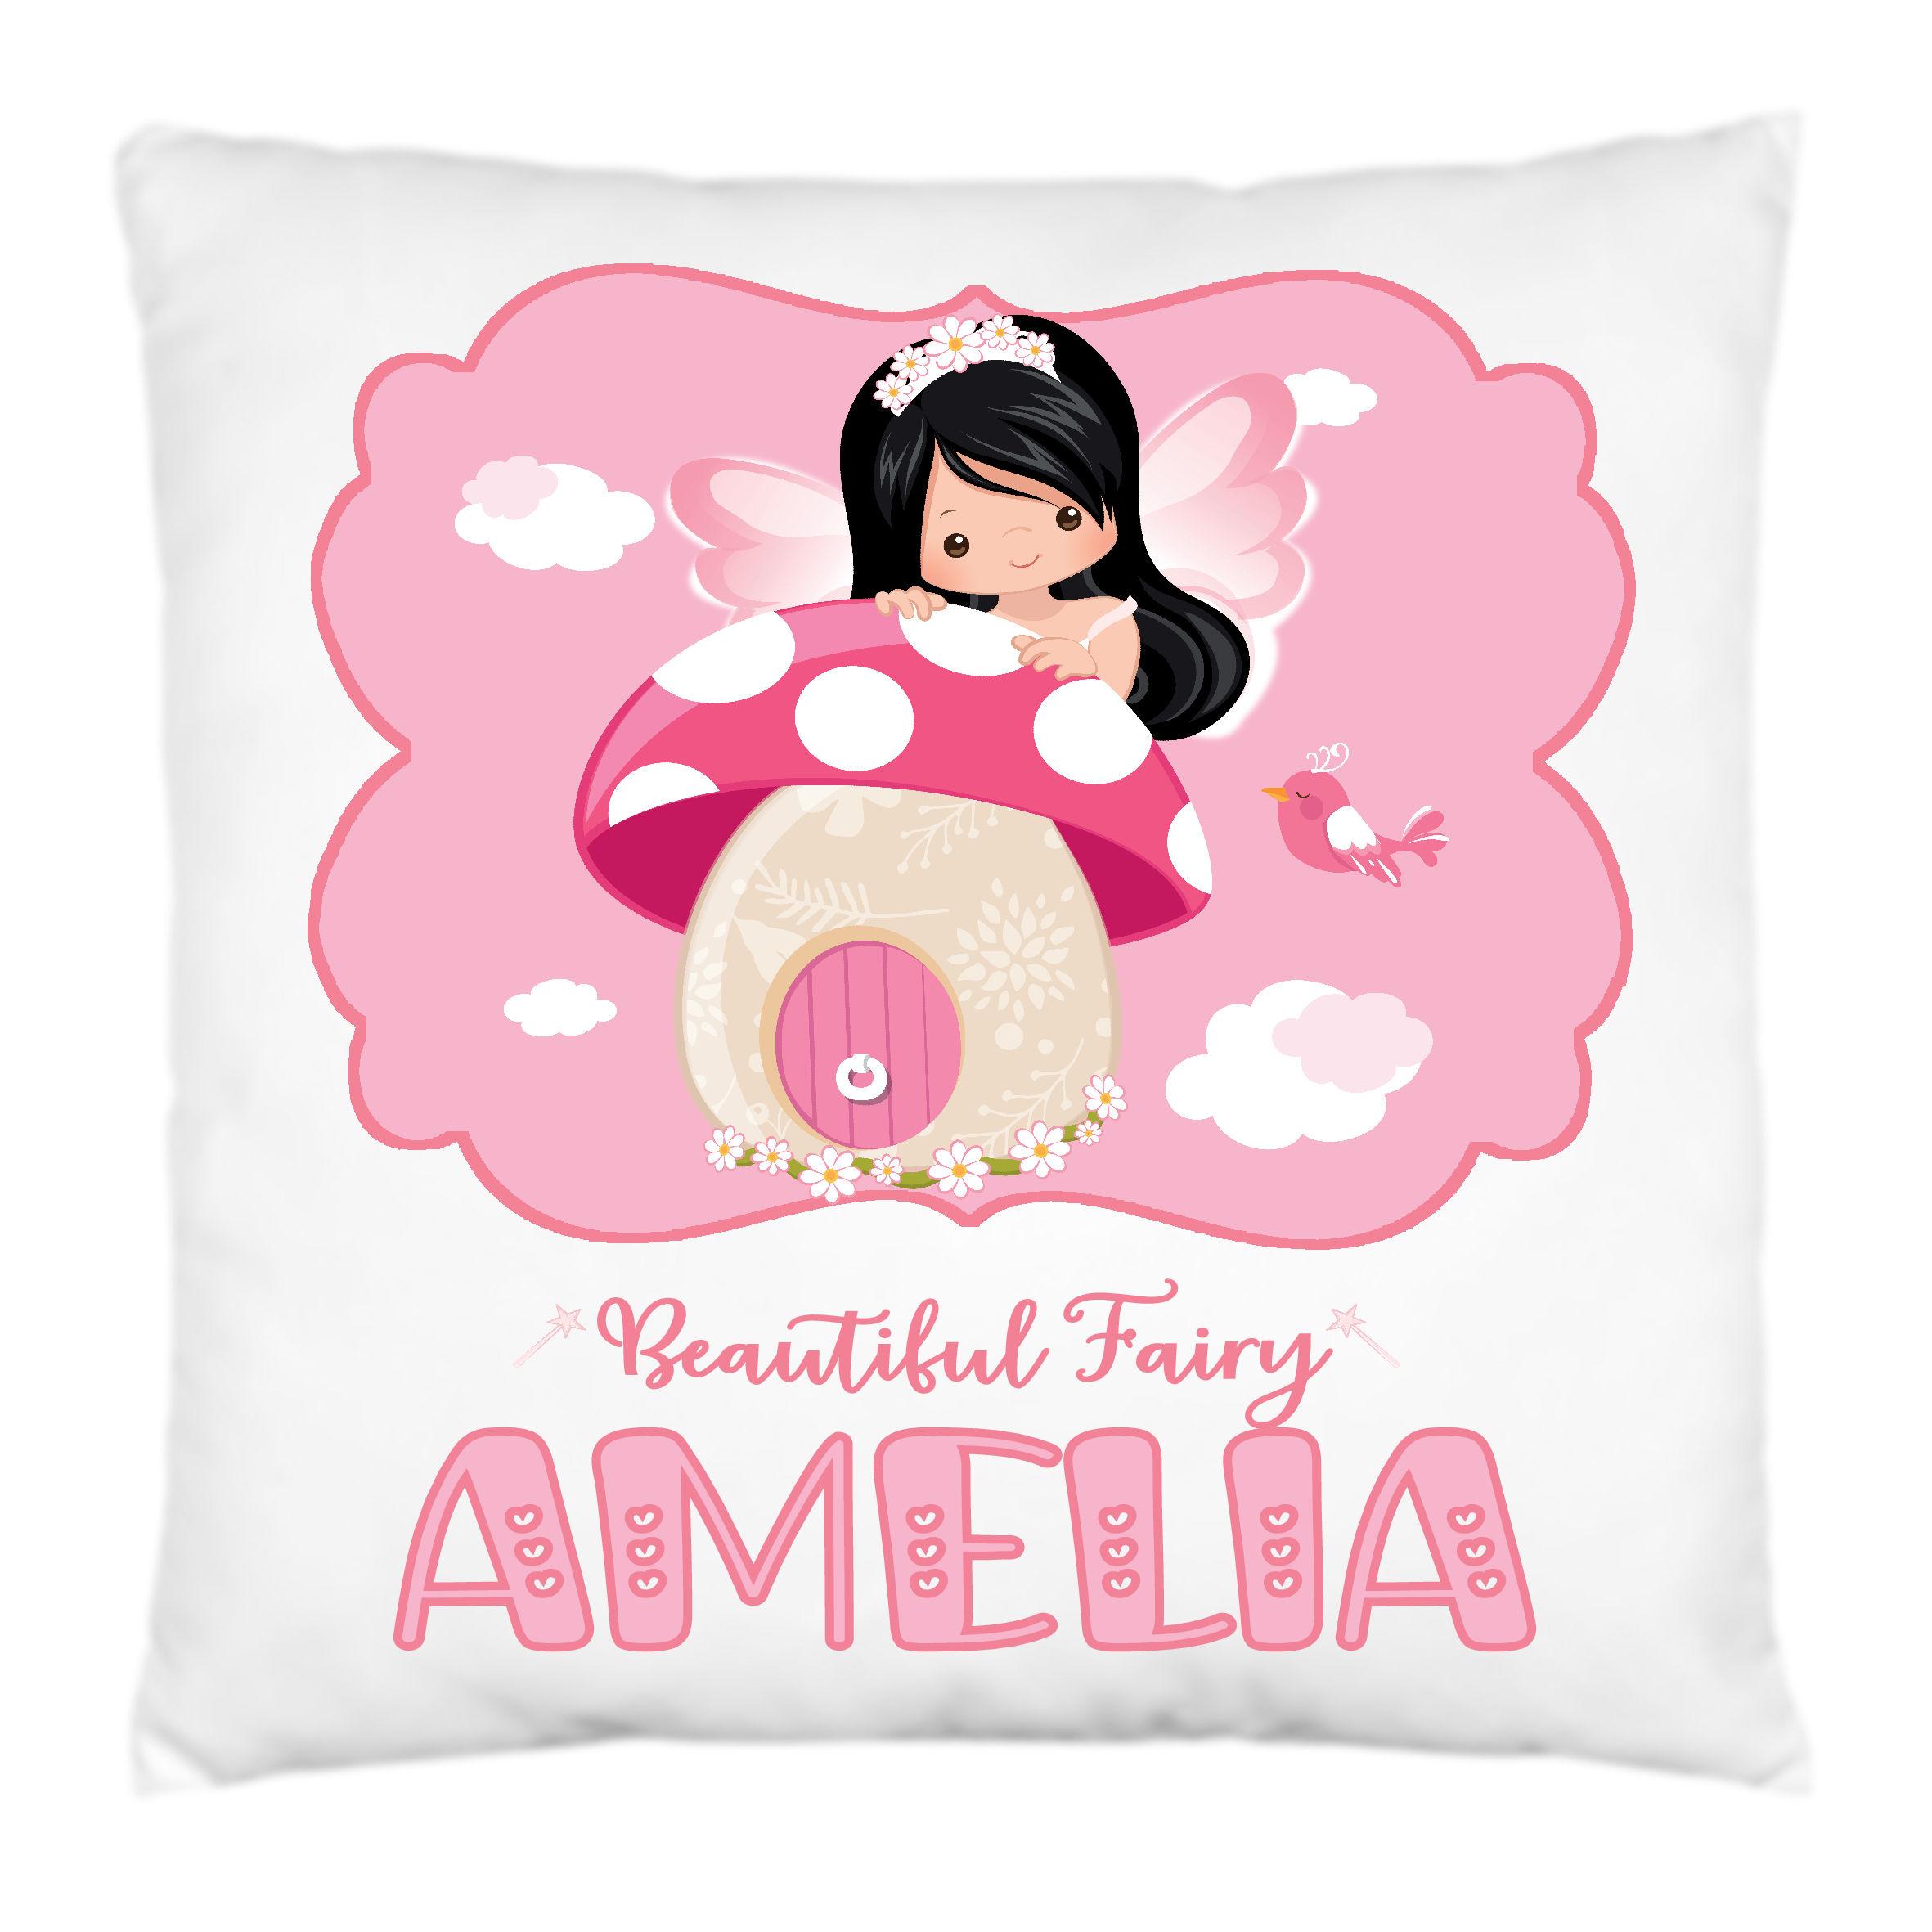 Fairy Cushion Personalised Pillow Throw Blonde or Dark Hair, Personalised Gift for Girls,Home Decor,Girls Bedroom Accessory